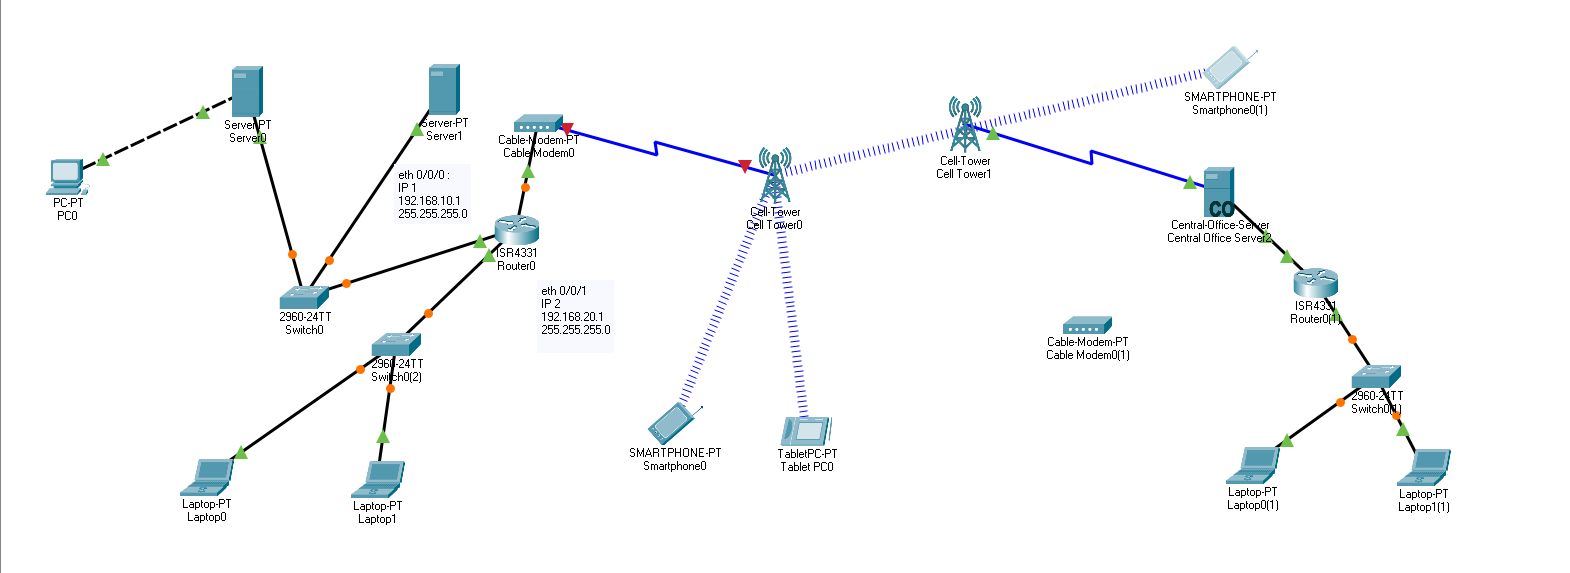 How to configuring a cell tower and cable modem (Packet tracer) - Cisco  Community